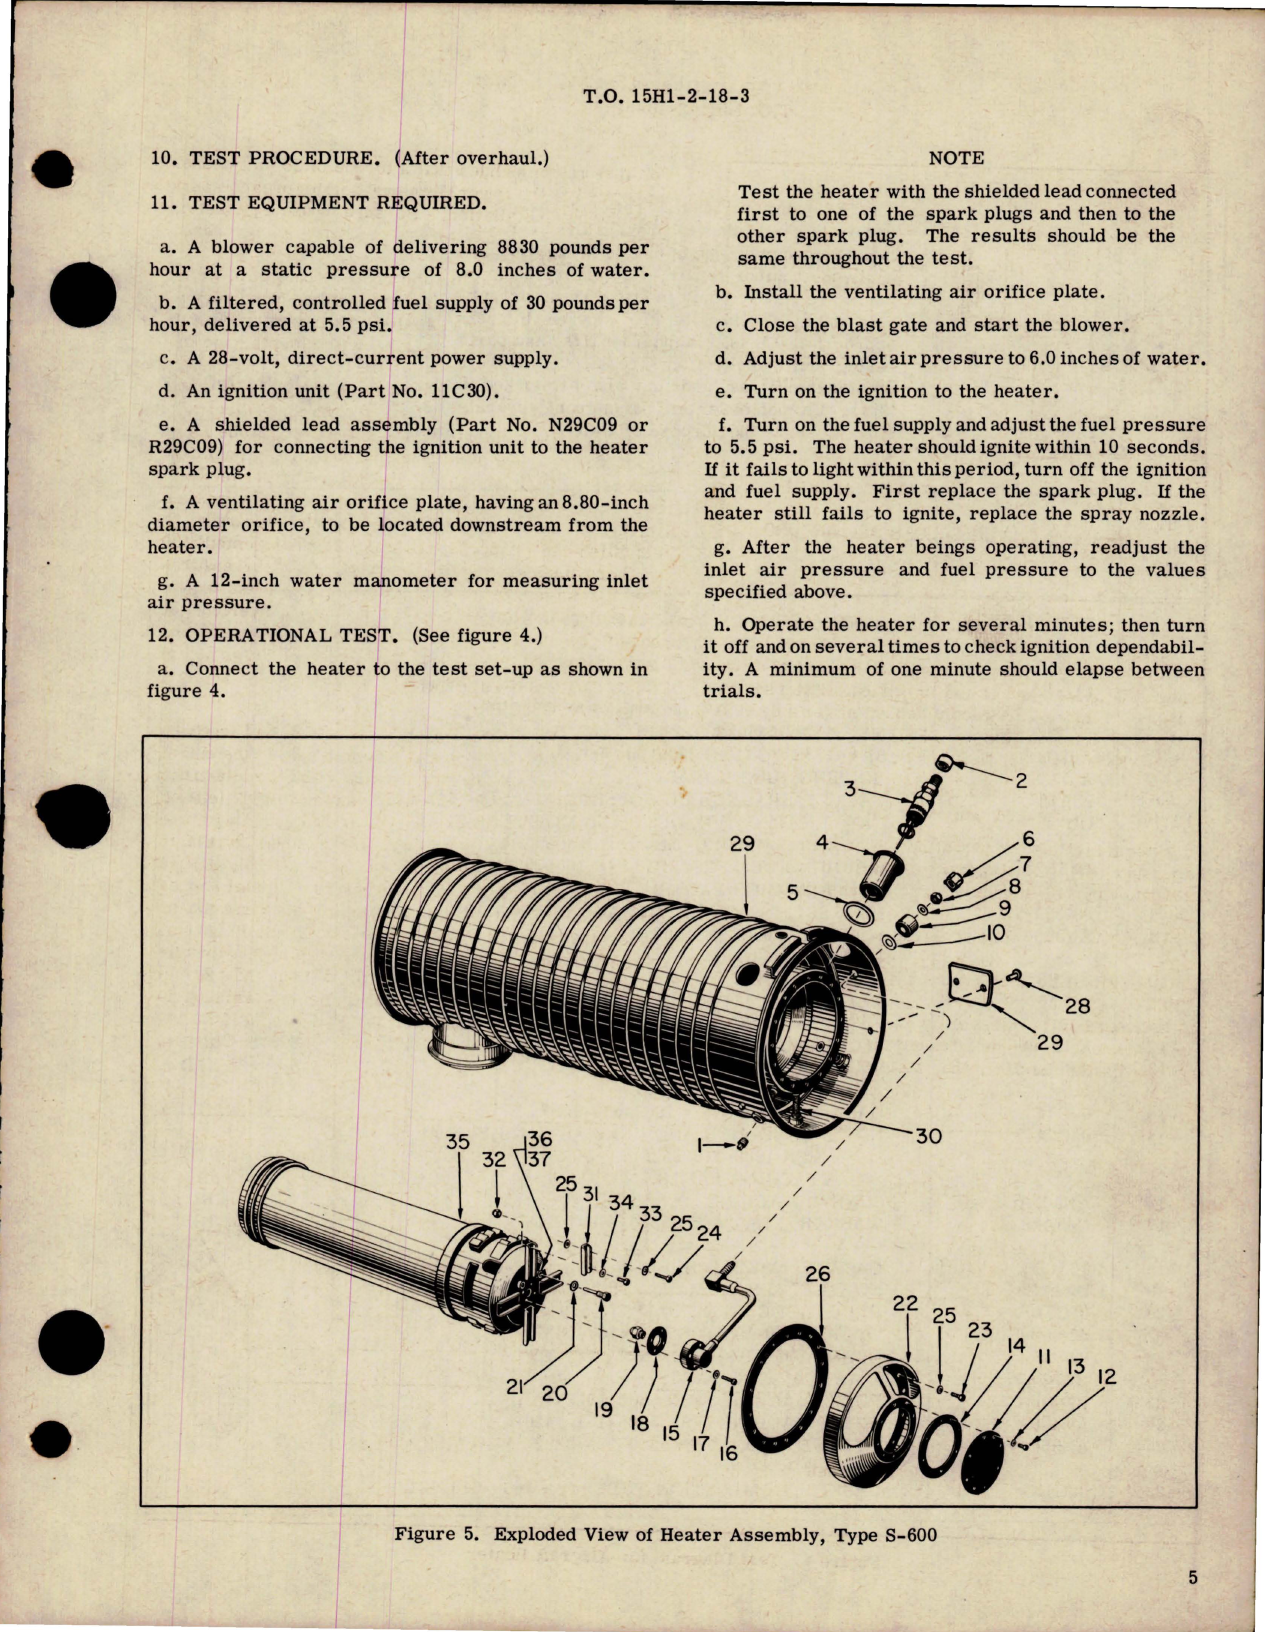 Sample page 5 from AirCorps Library document: Overhaul Instructions with Parts Breakdown for Aircraft Heater - Parts B03C31 - Type S-600 